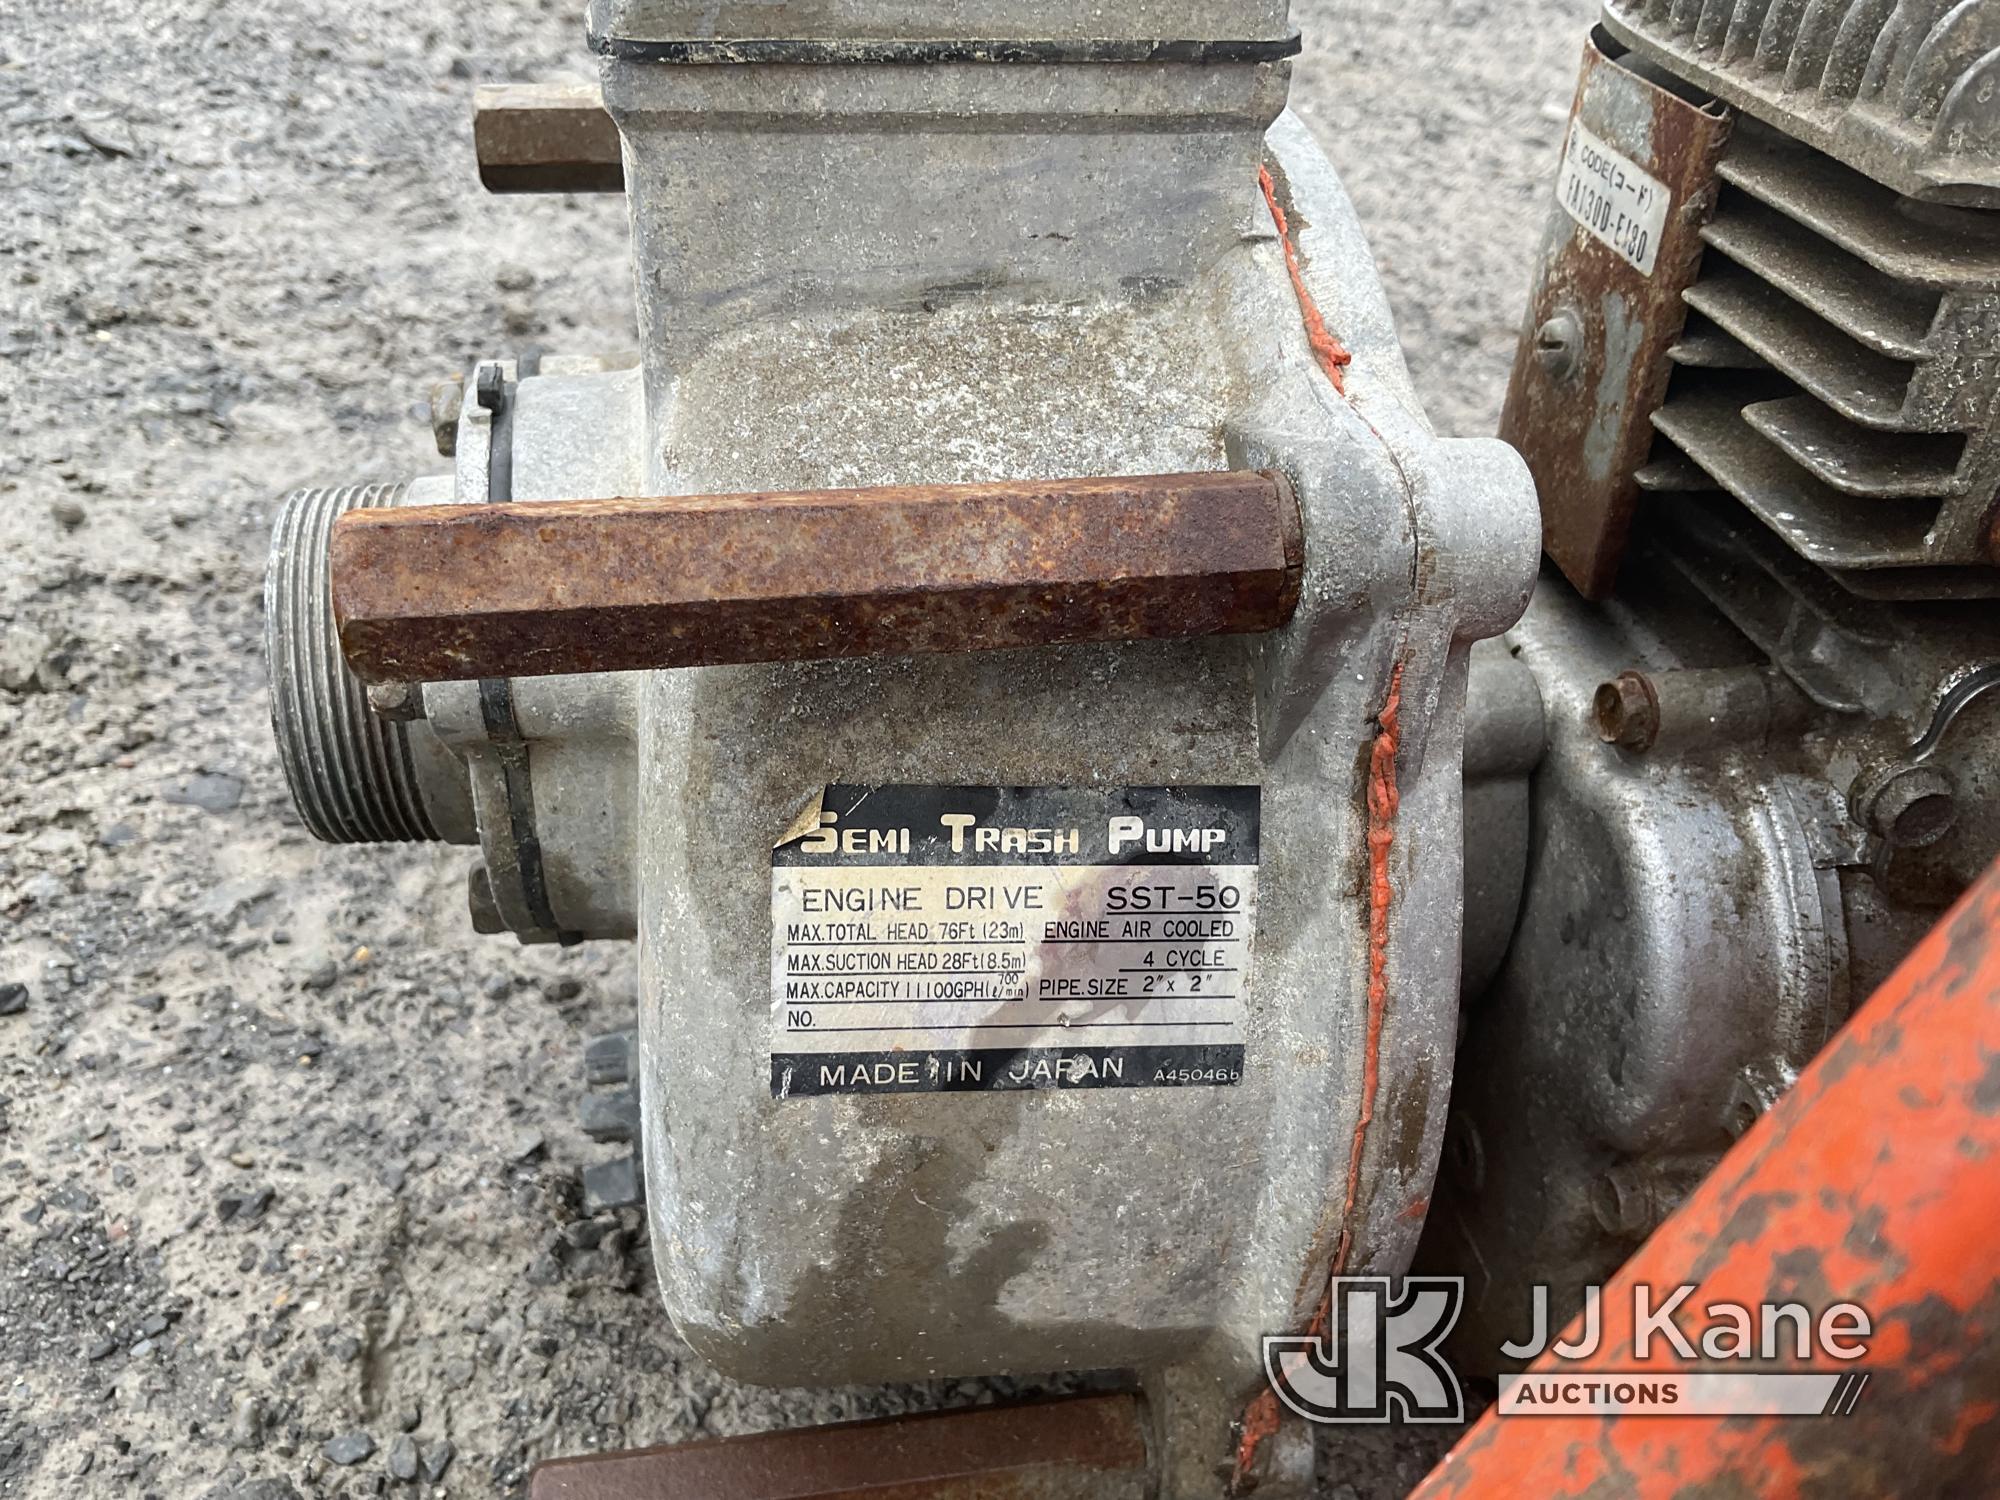 (Rome, NY) Semi Trash Pump Condition unknown, per seller: did not run when taken from service